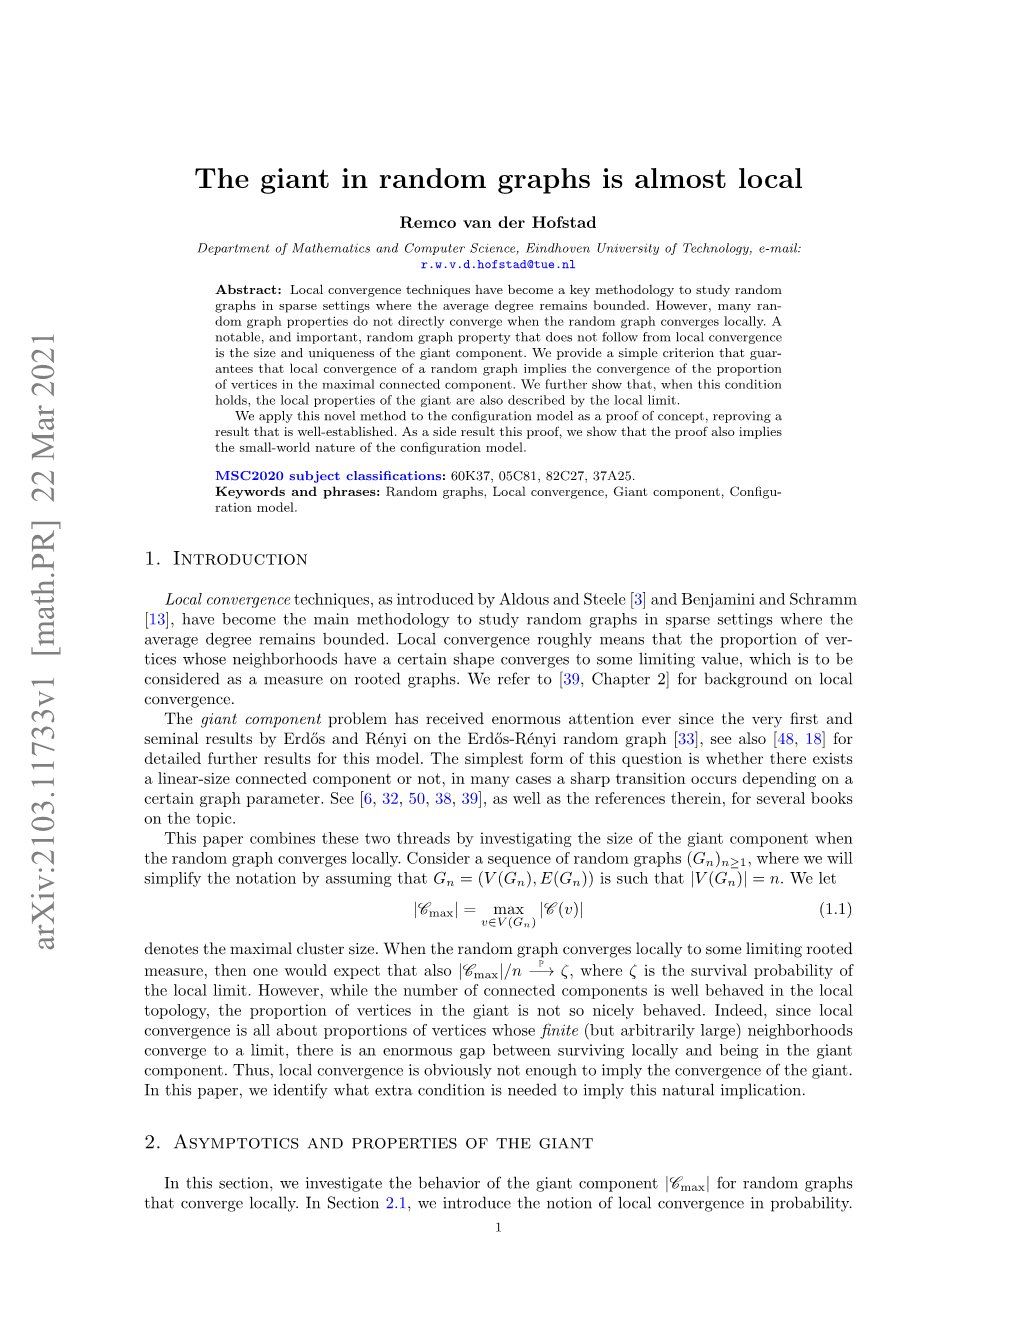 The Giant in Random Graphs Is Almost Local